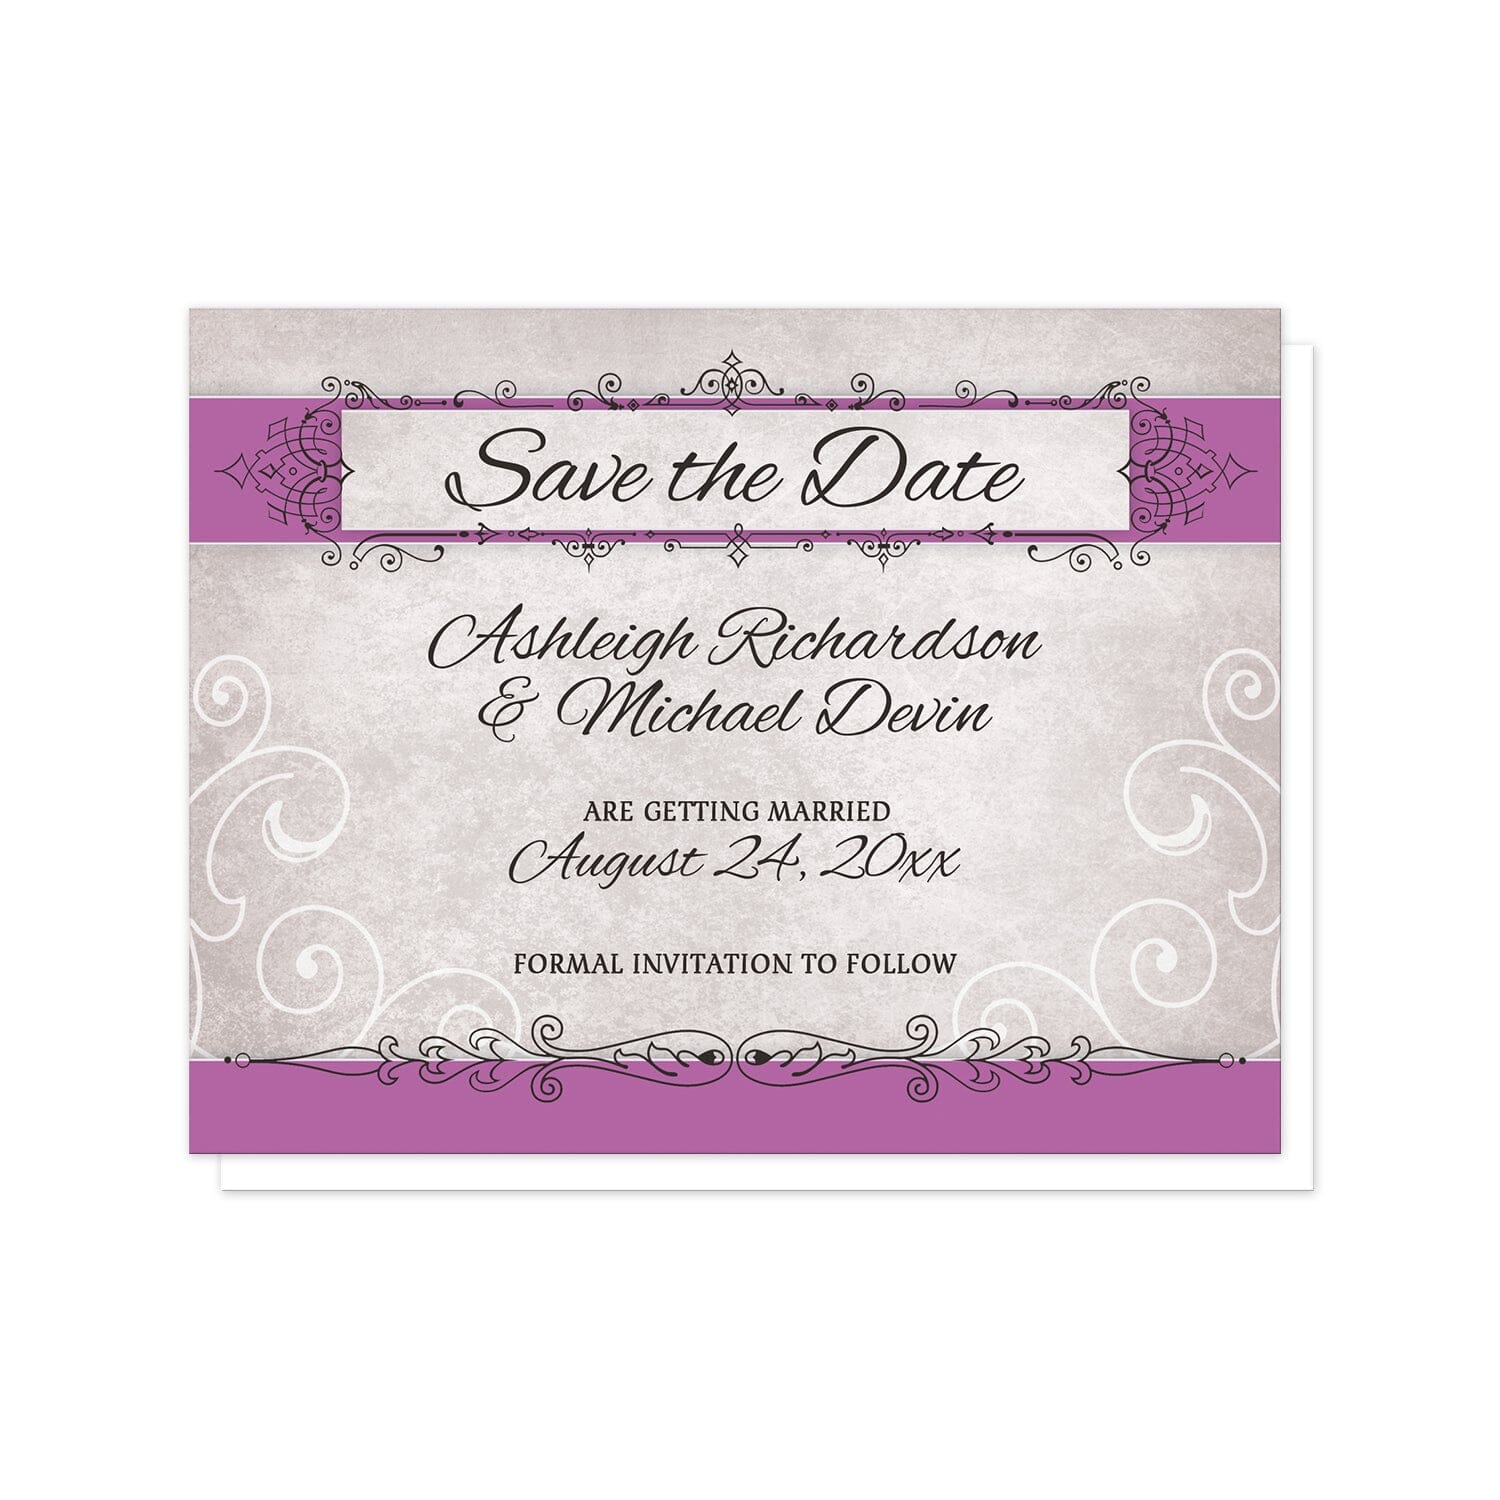 Vintage Orchid Purple Ornate Save the Date Cards at Artistically Invited. Pretty vintage orchid purple ornate save the date cards elegant purple orchid stripes with ornate black flourish frames and lines over them on a vintage grayish weathered background with white line flourishes. Your personalized wedding date details are custom printed in black between the purple stripes over the gray background. 